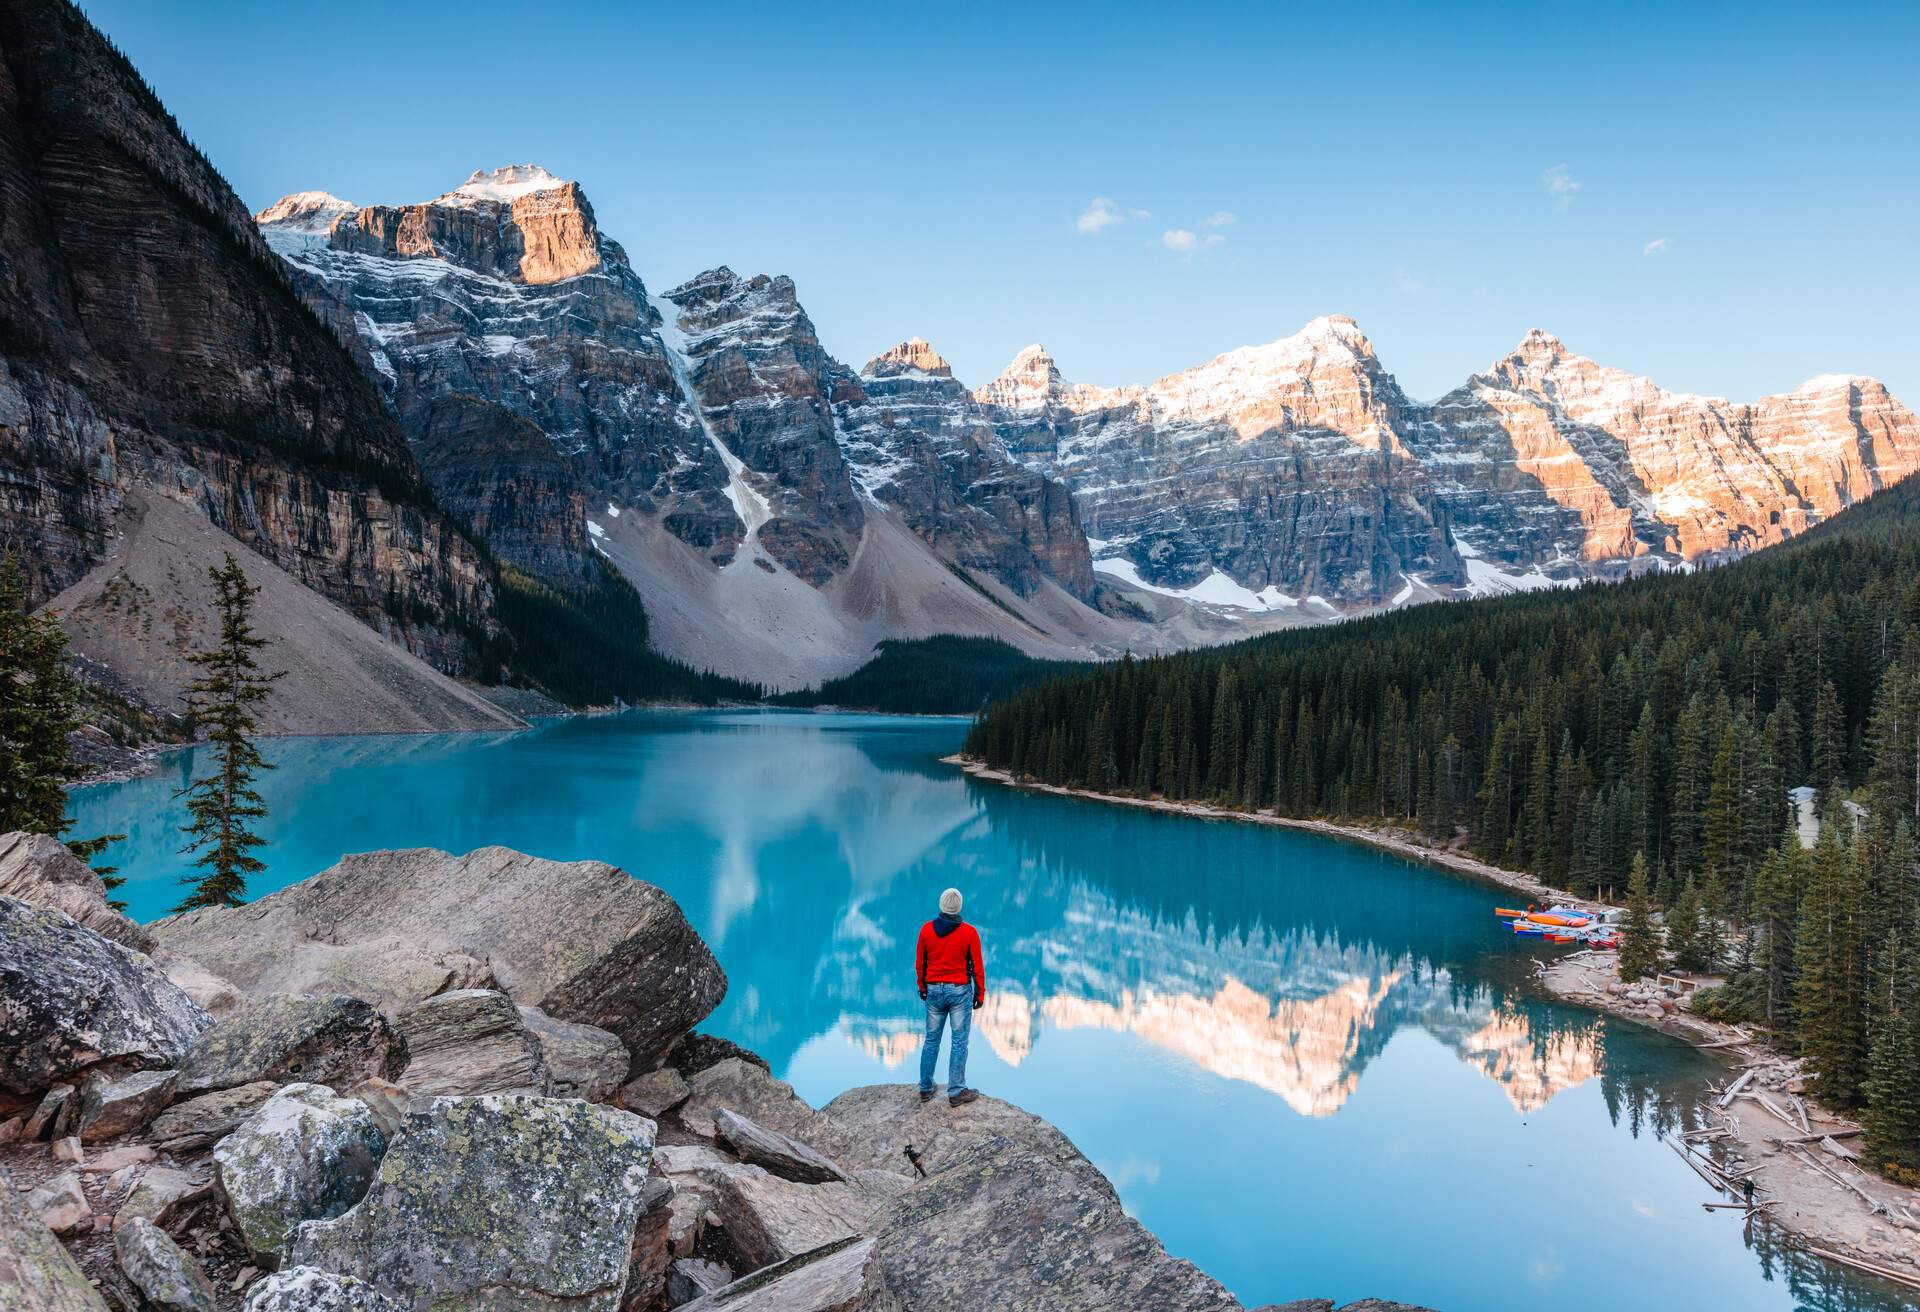 DEST_CANADA_ALBERTA_BANFF-NATIONAL-PARK_THEME_PEOPLE_MAN_AT_LAKE_MORAINE_GettyImages-908178812